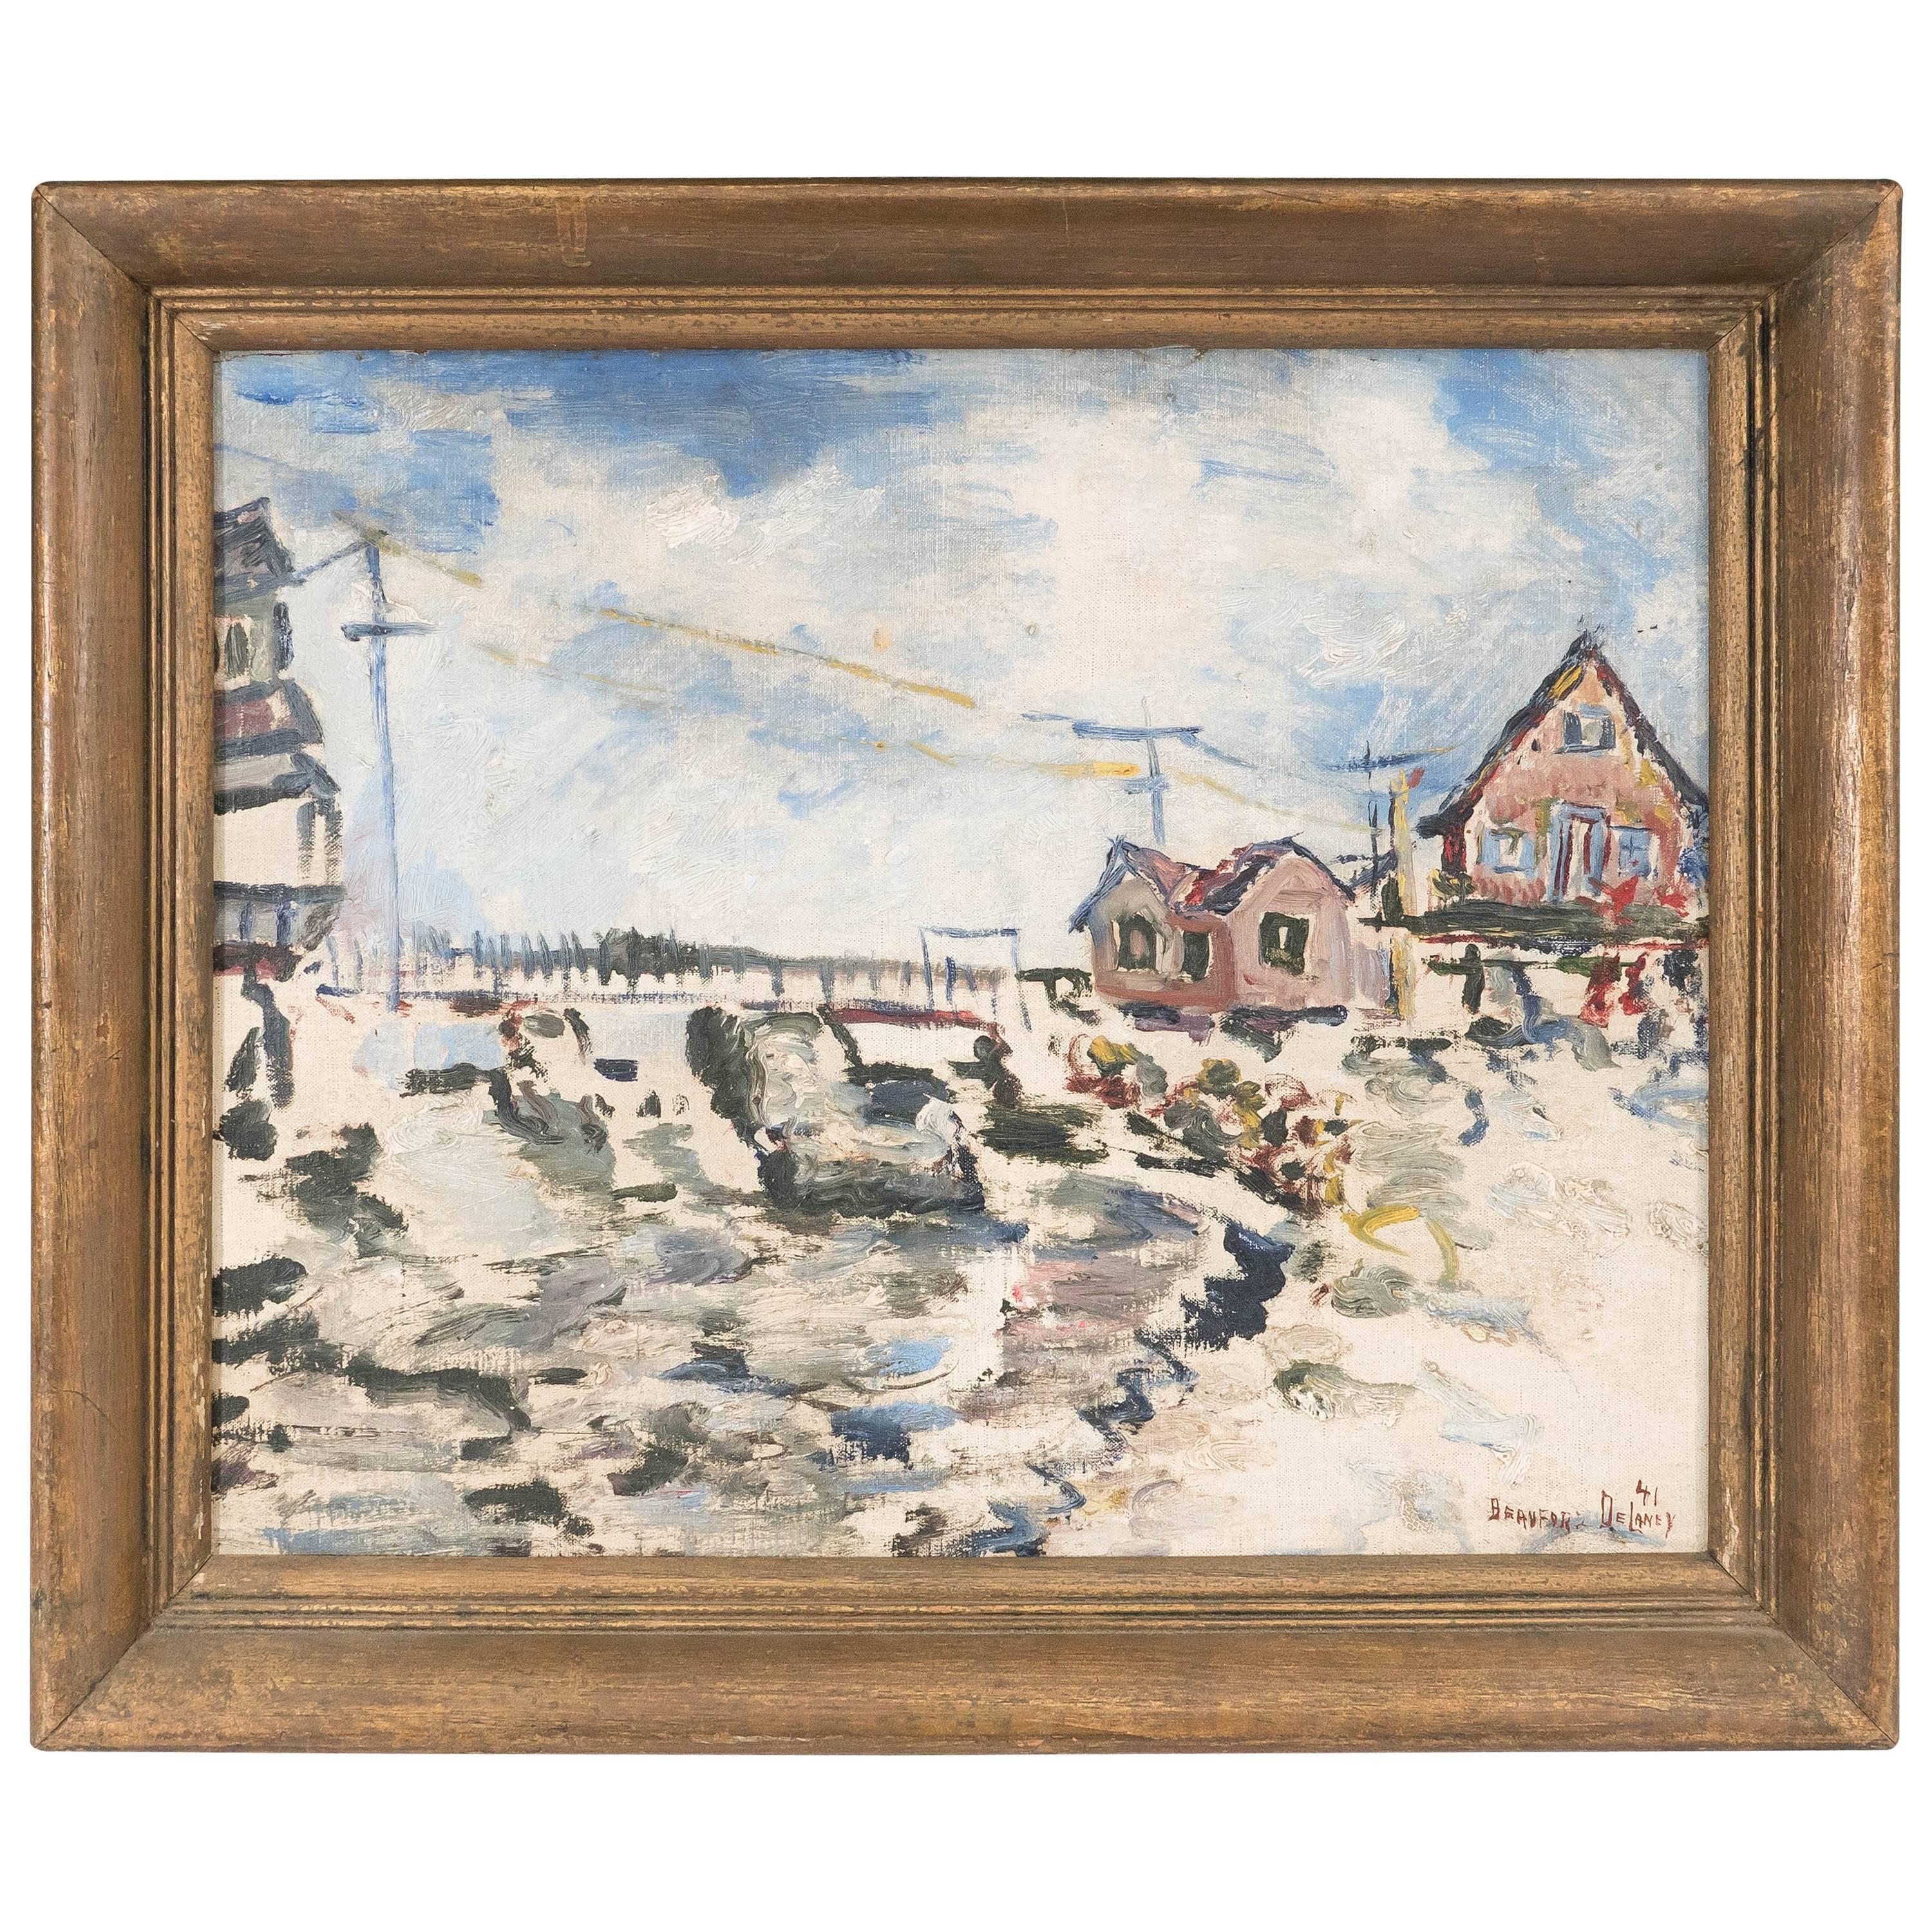 Beauford Delaney Waterfront Landscape, Signed and Dated